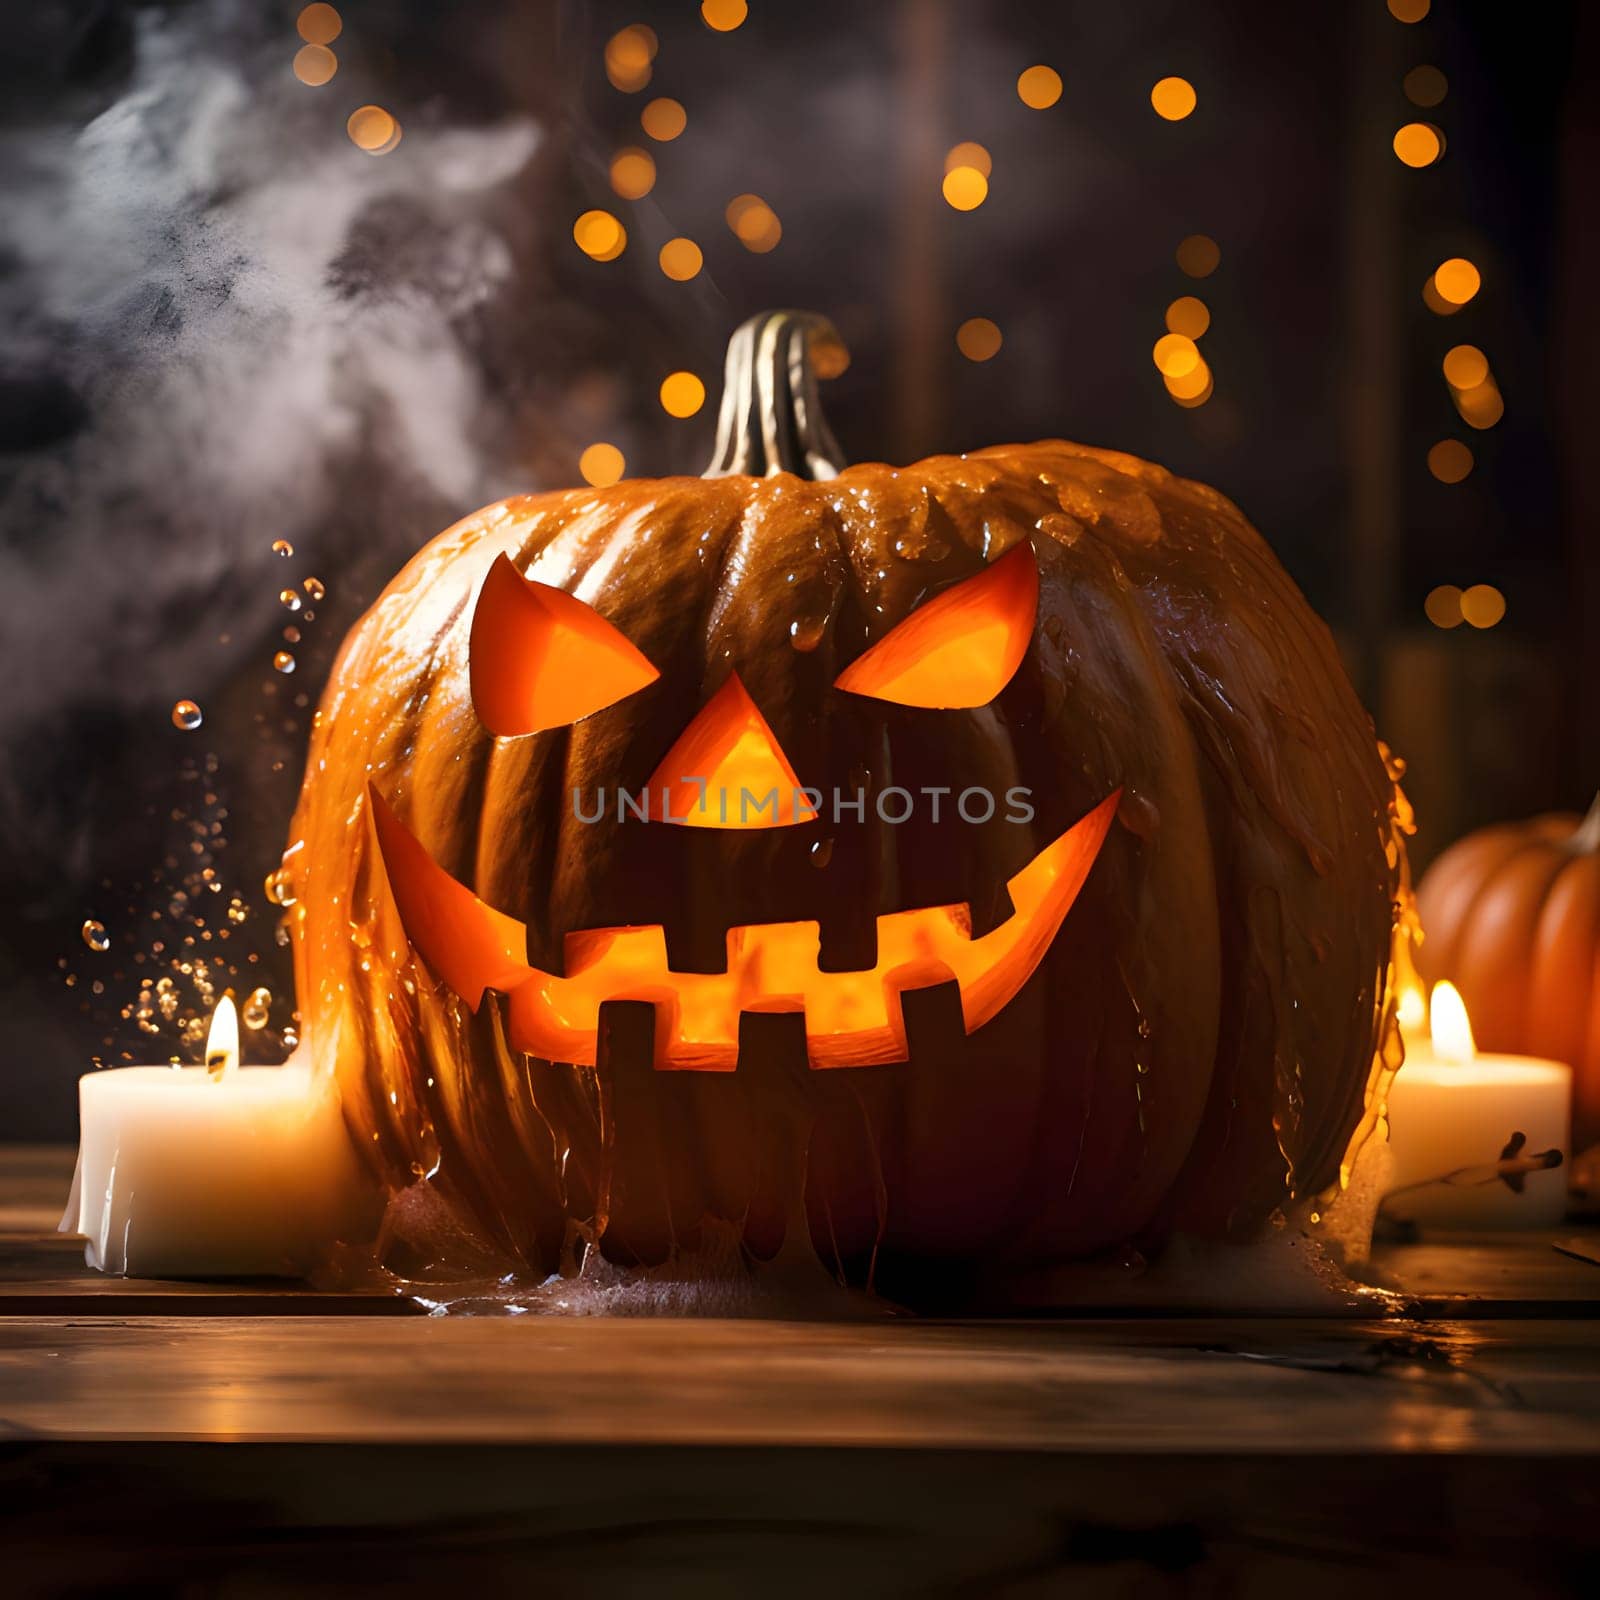 Big glowing jack-o-lantern pumpkin around candles in the background bokeh effect and smoke, a Halloween image. by ThemesS